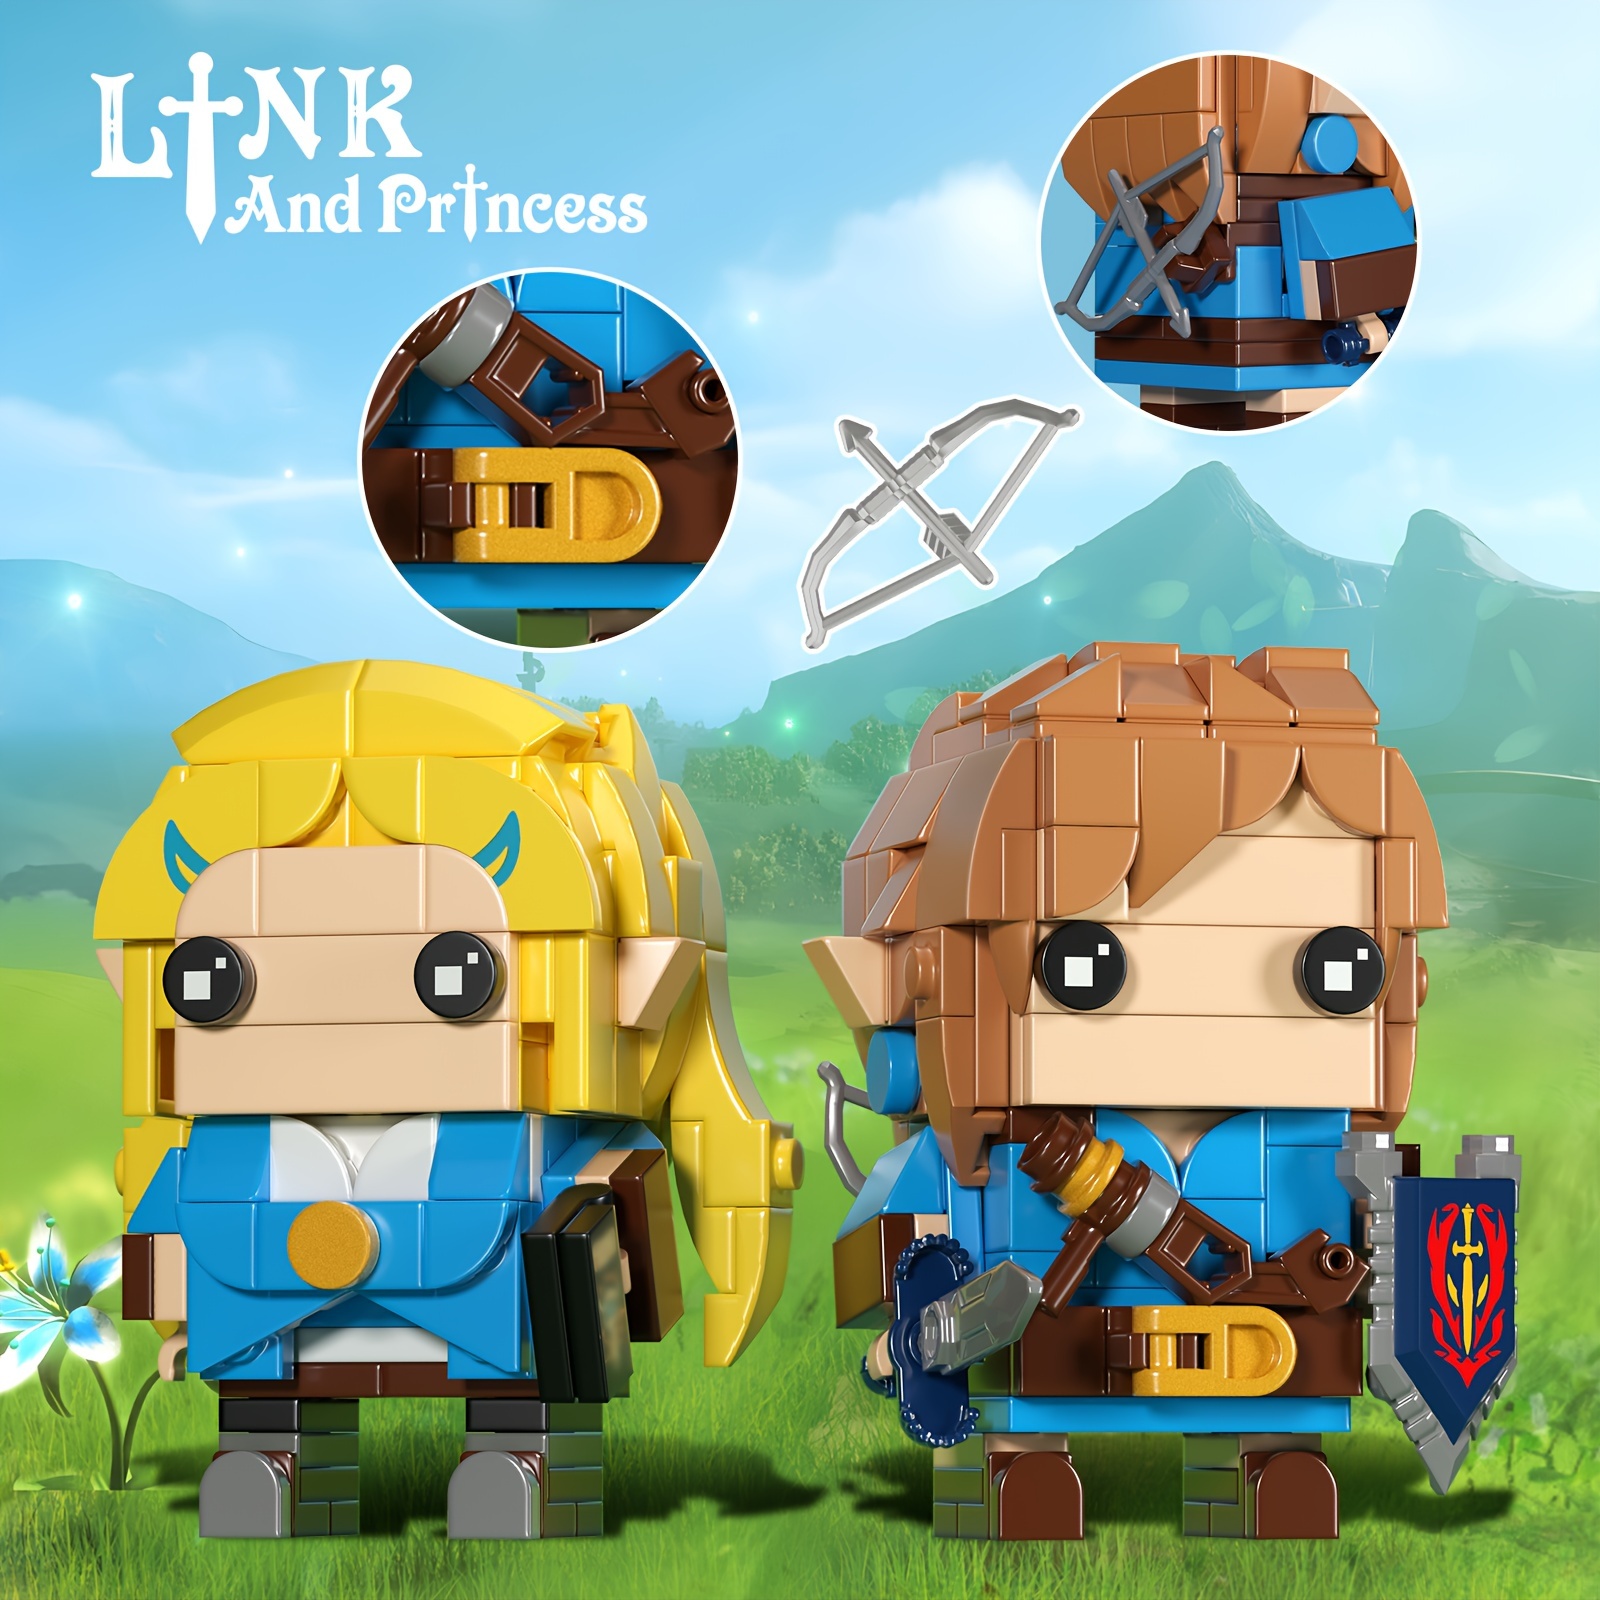 Would LEGO Legend of Zelda be better suited to mini-dolls?